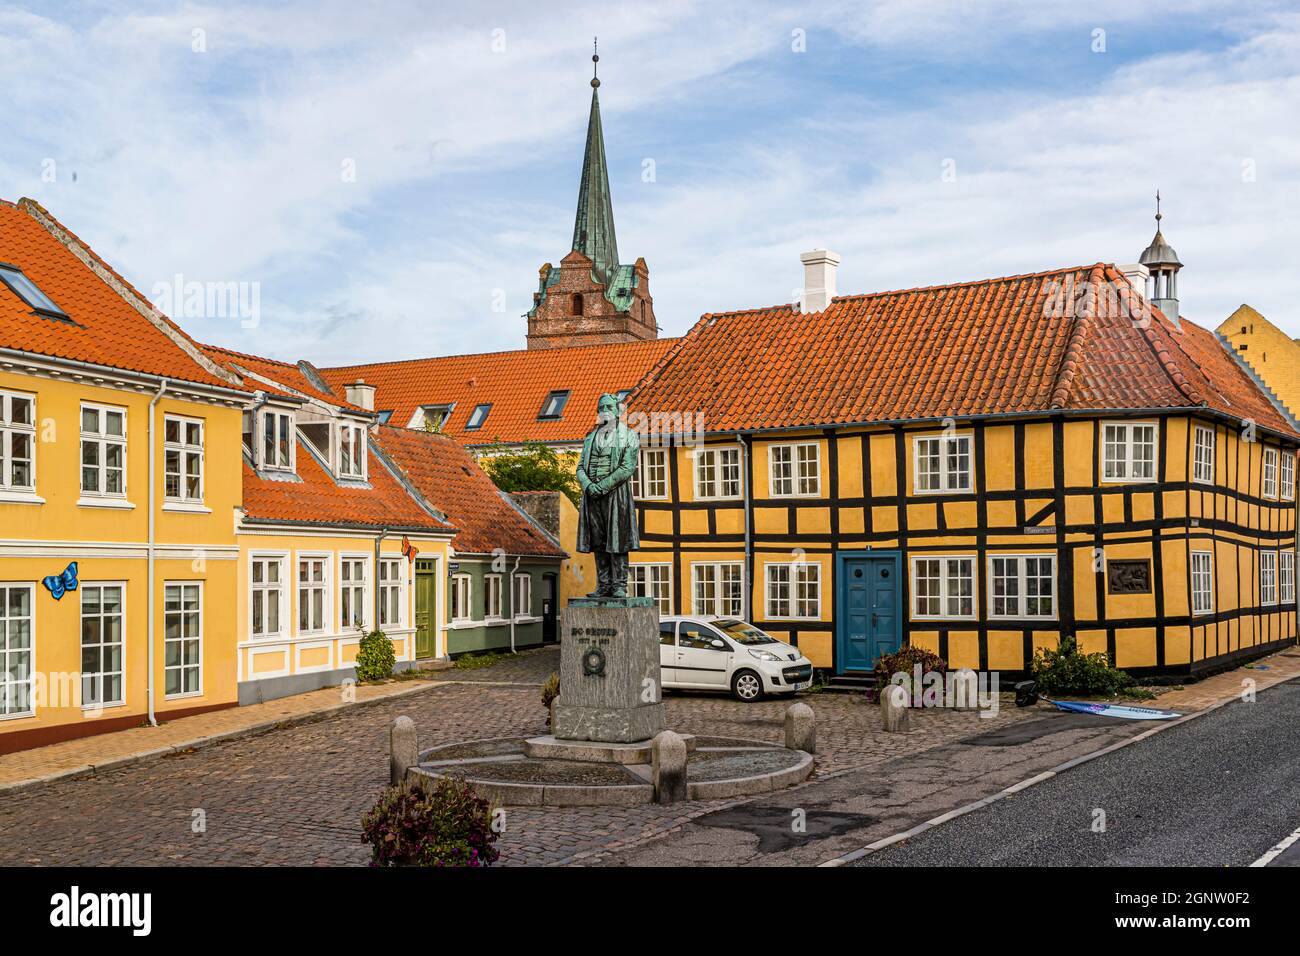 Goose market in Rudkøbing. The statue commemorates the physicist Hans Christian Ørsted. The discoverer of electromagnetism was born in Rudkøbing in 1777 as the son of a pharmacist. Rudkøbing, Langeland, Denmark Stock Photo